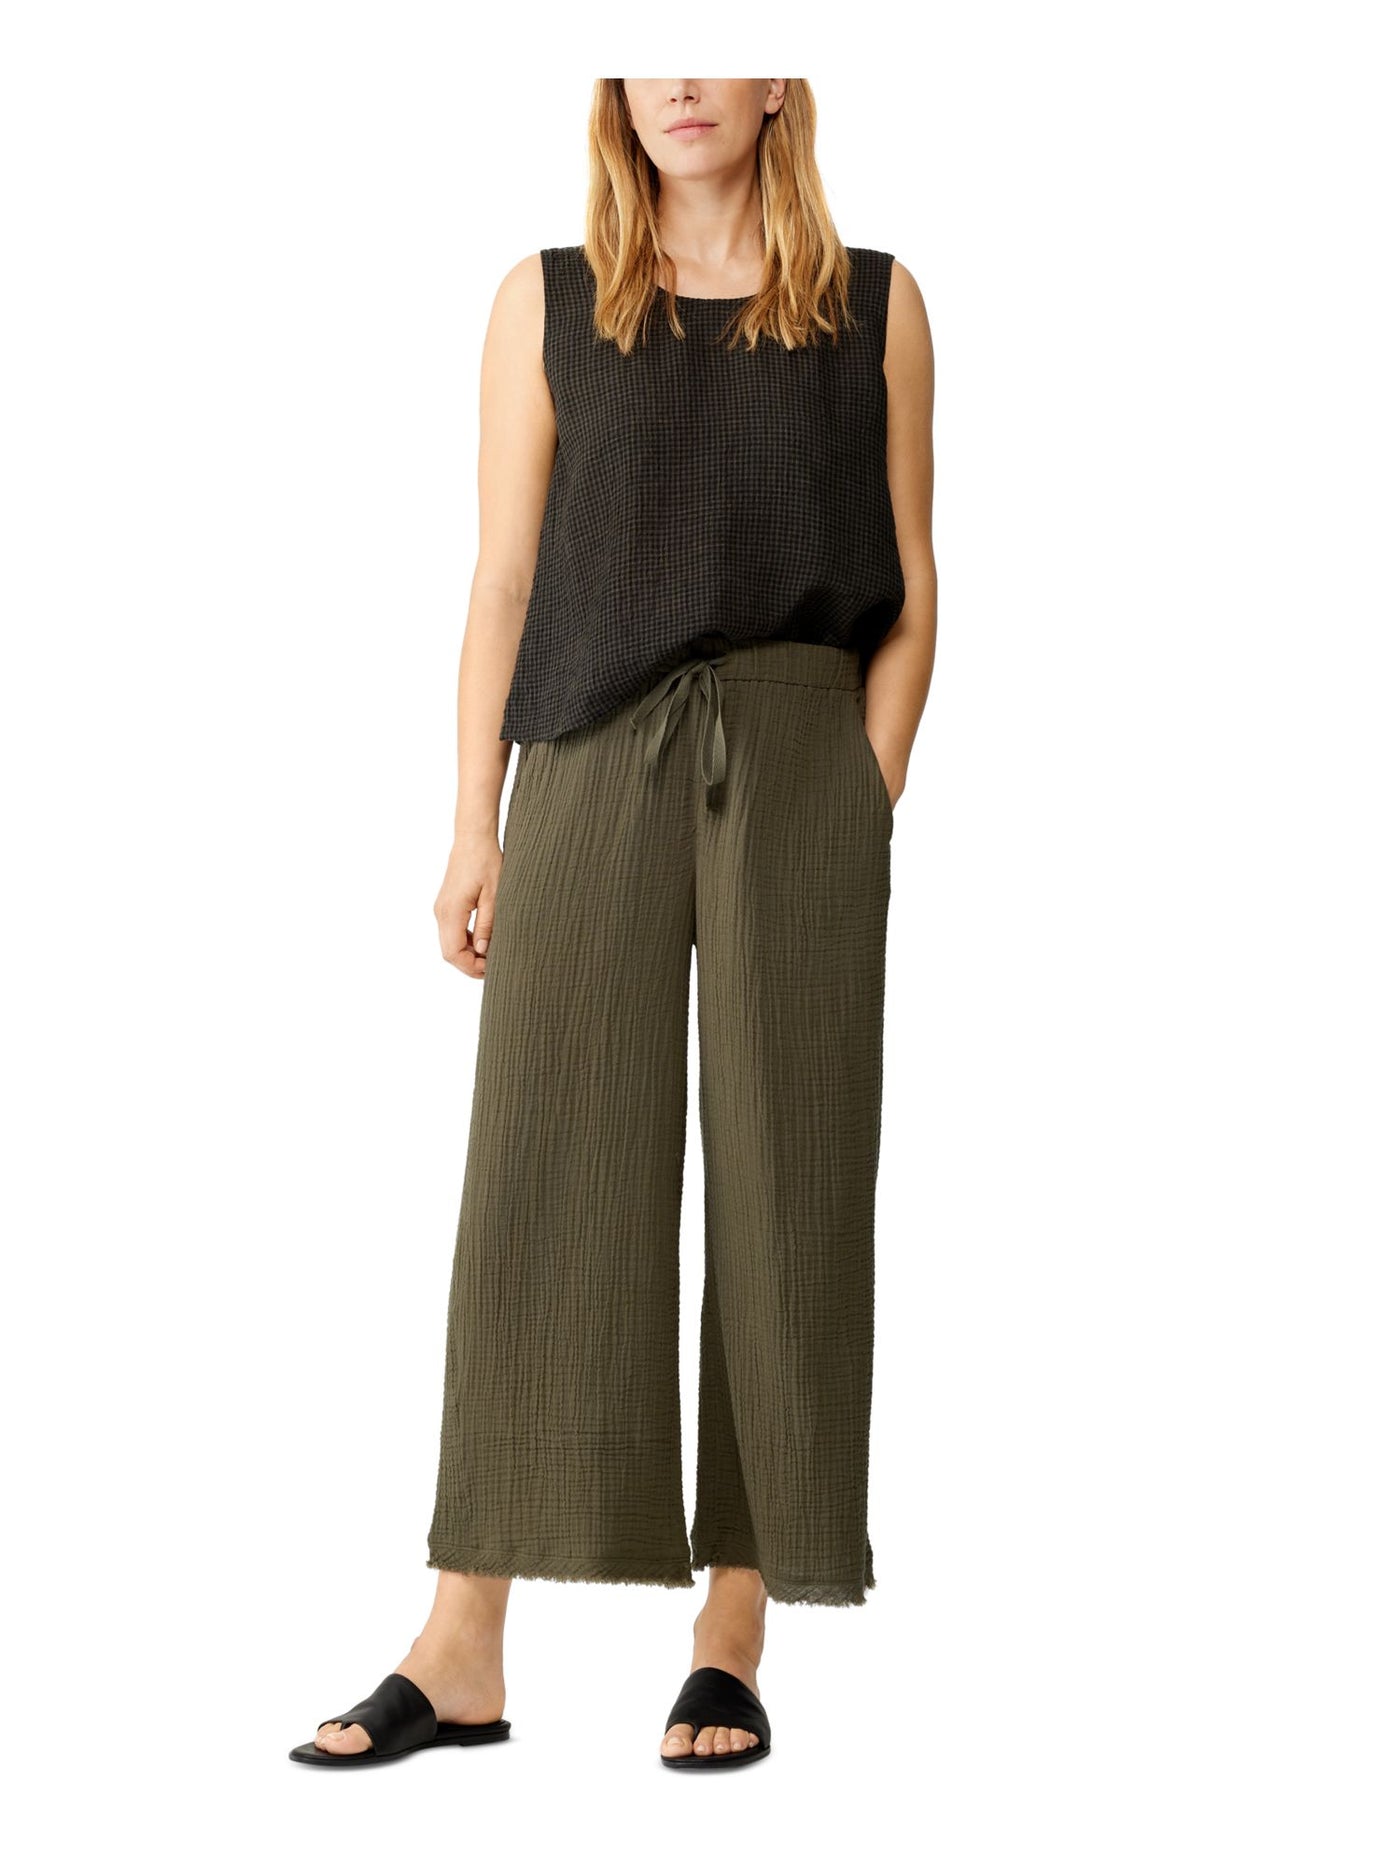 EILEEN FISHER Womens Green Textured Unlined Elastic Waist Drawstring Pull On Wide Leg Pants Petites PP